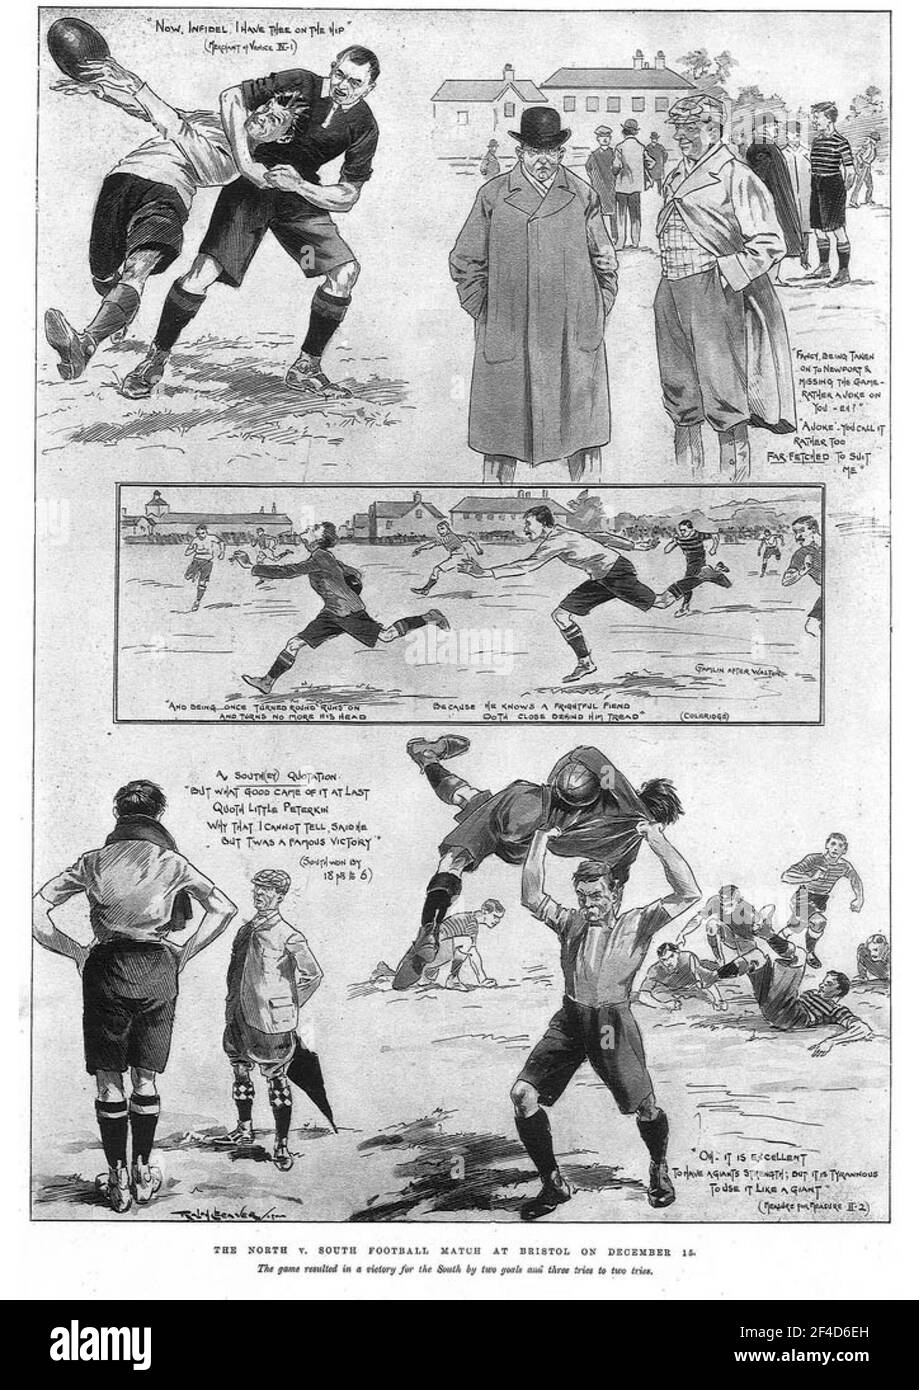 Vintage 1900 depiction of an early football match between the north and south of England. Looks a bit of a rough-house. Stock Photo